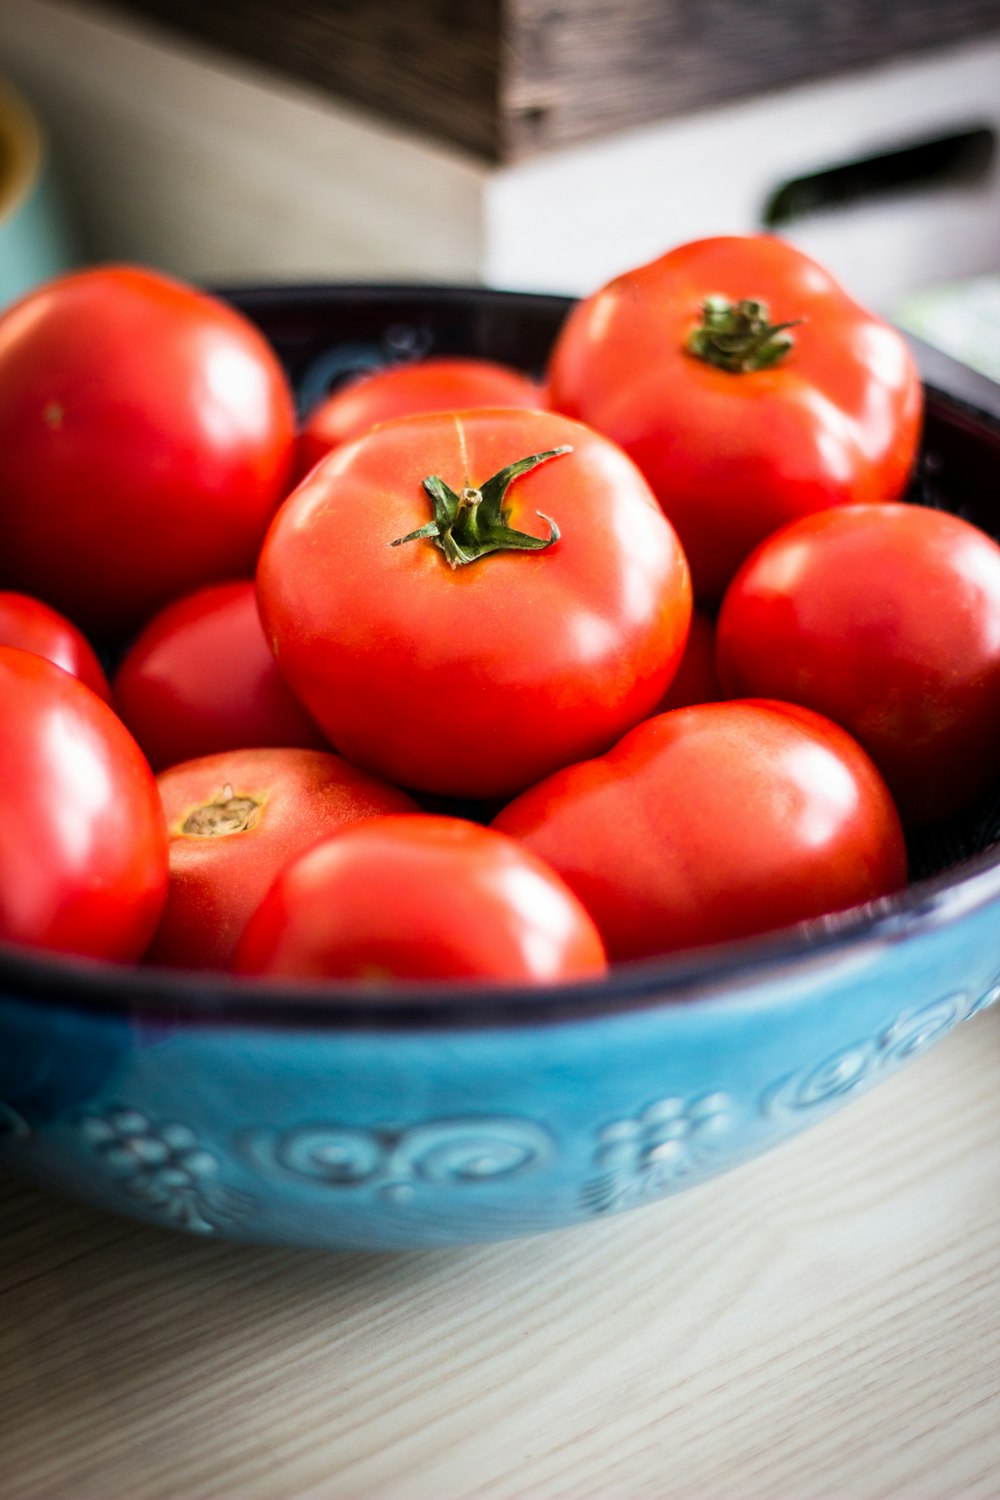 a bowl of red tomatoes